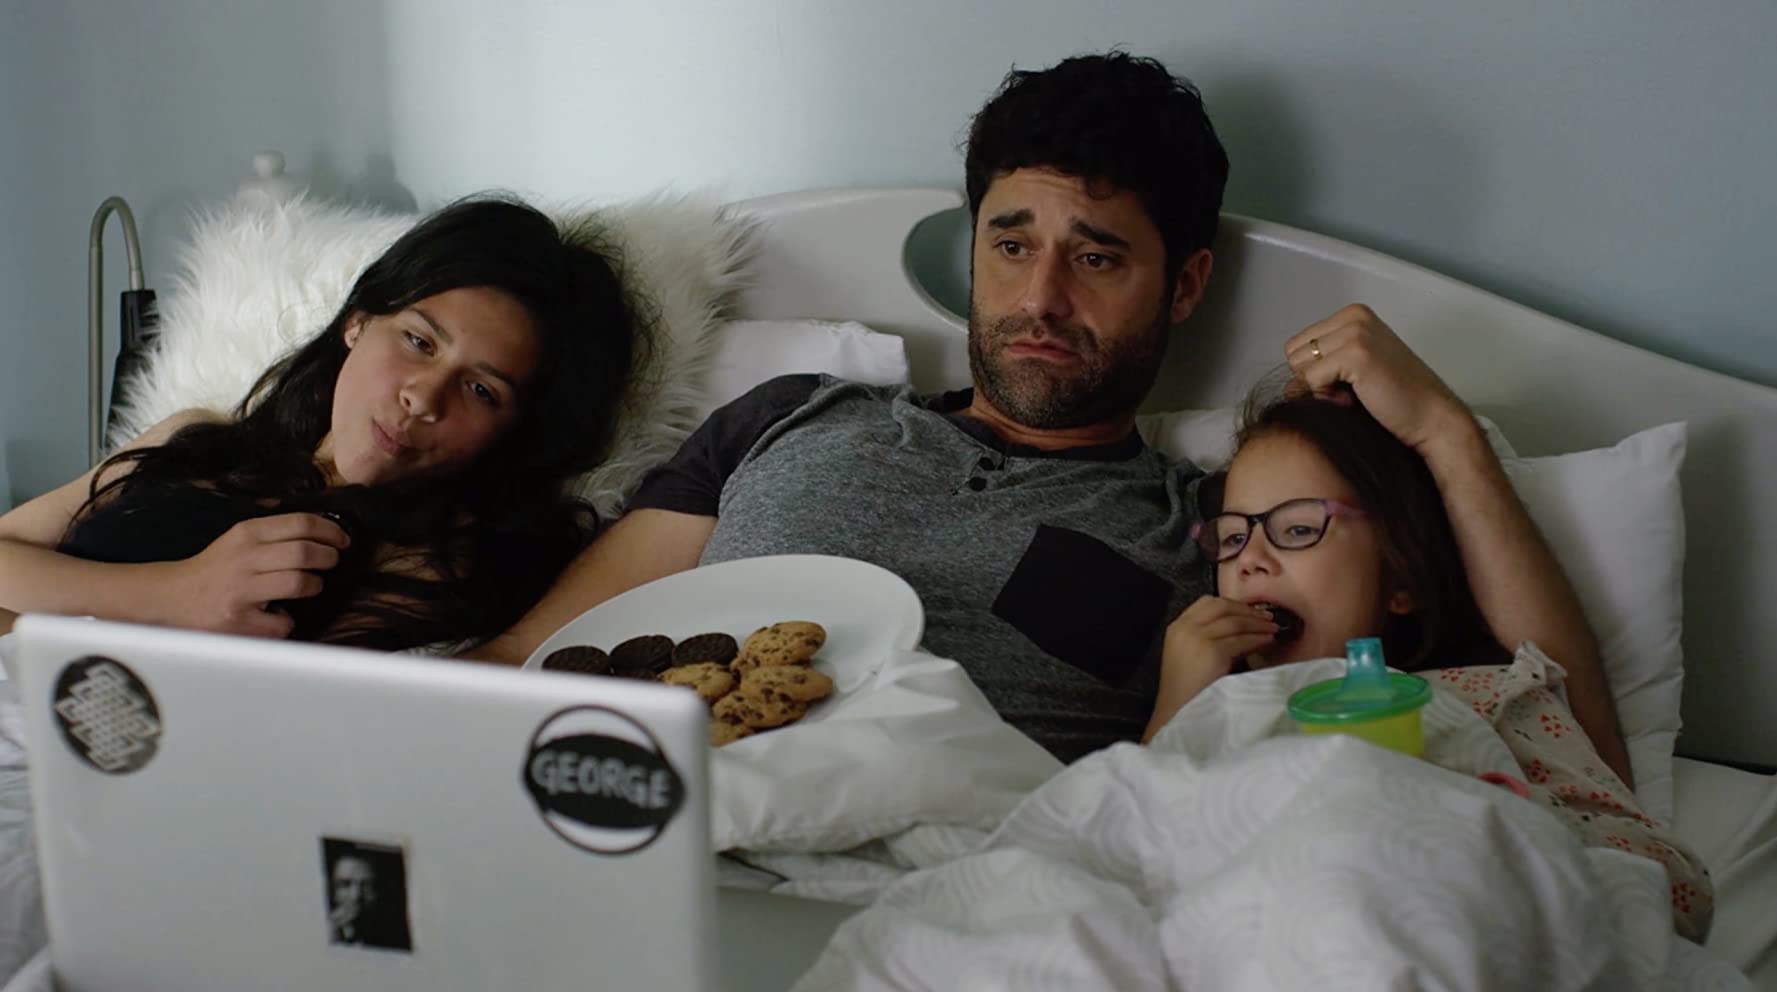 A father and his two young daughters, underneath the covers of a bed. They are watching something on a laptop screen and eating cookies.